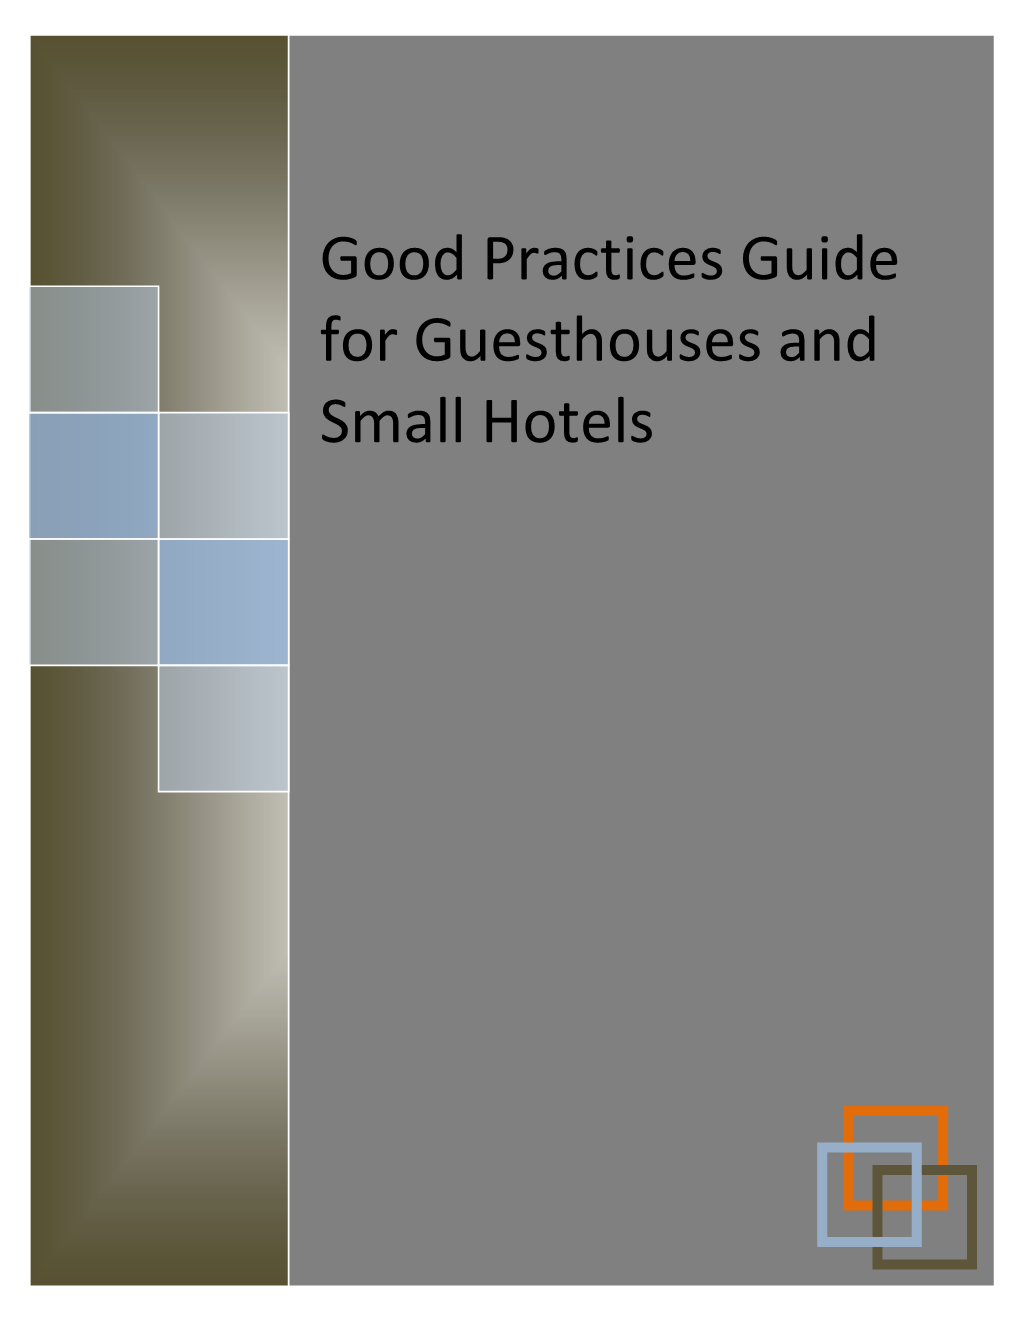 Good Practices Guide for Guesthouses and Small Hotels